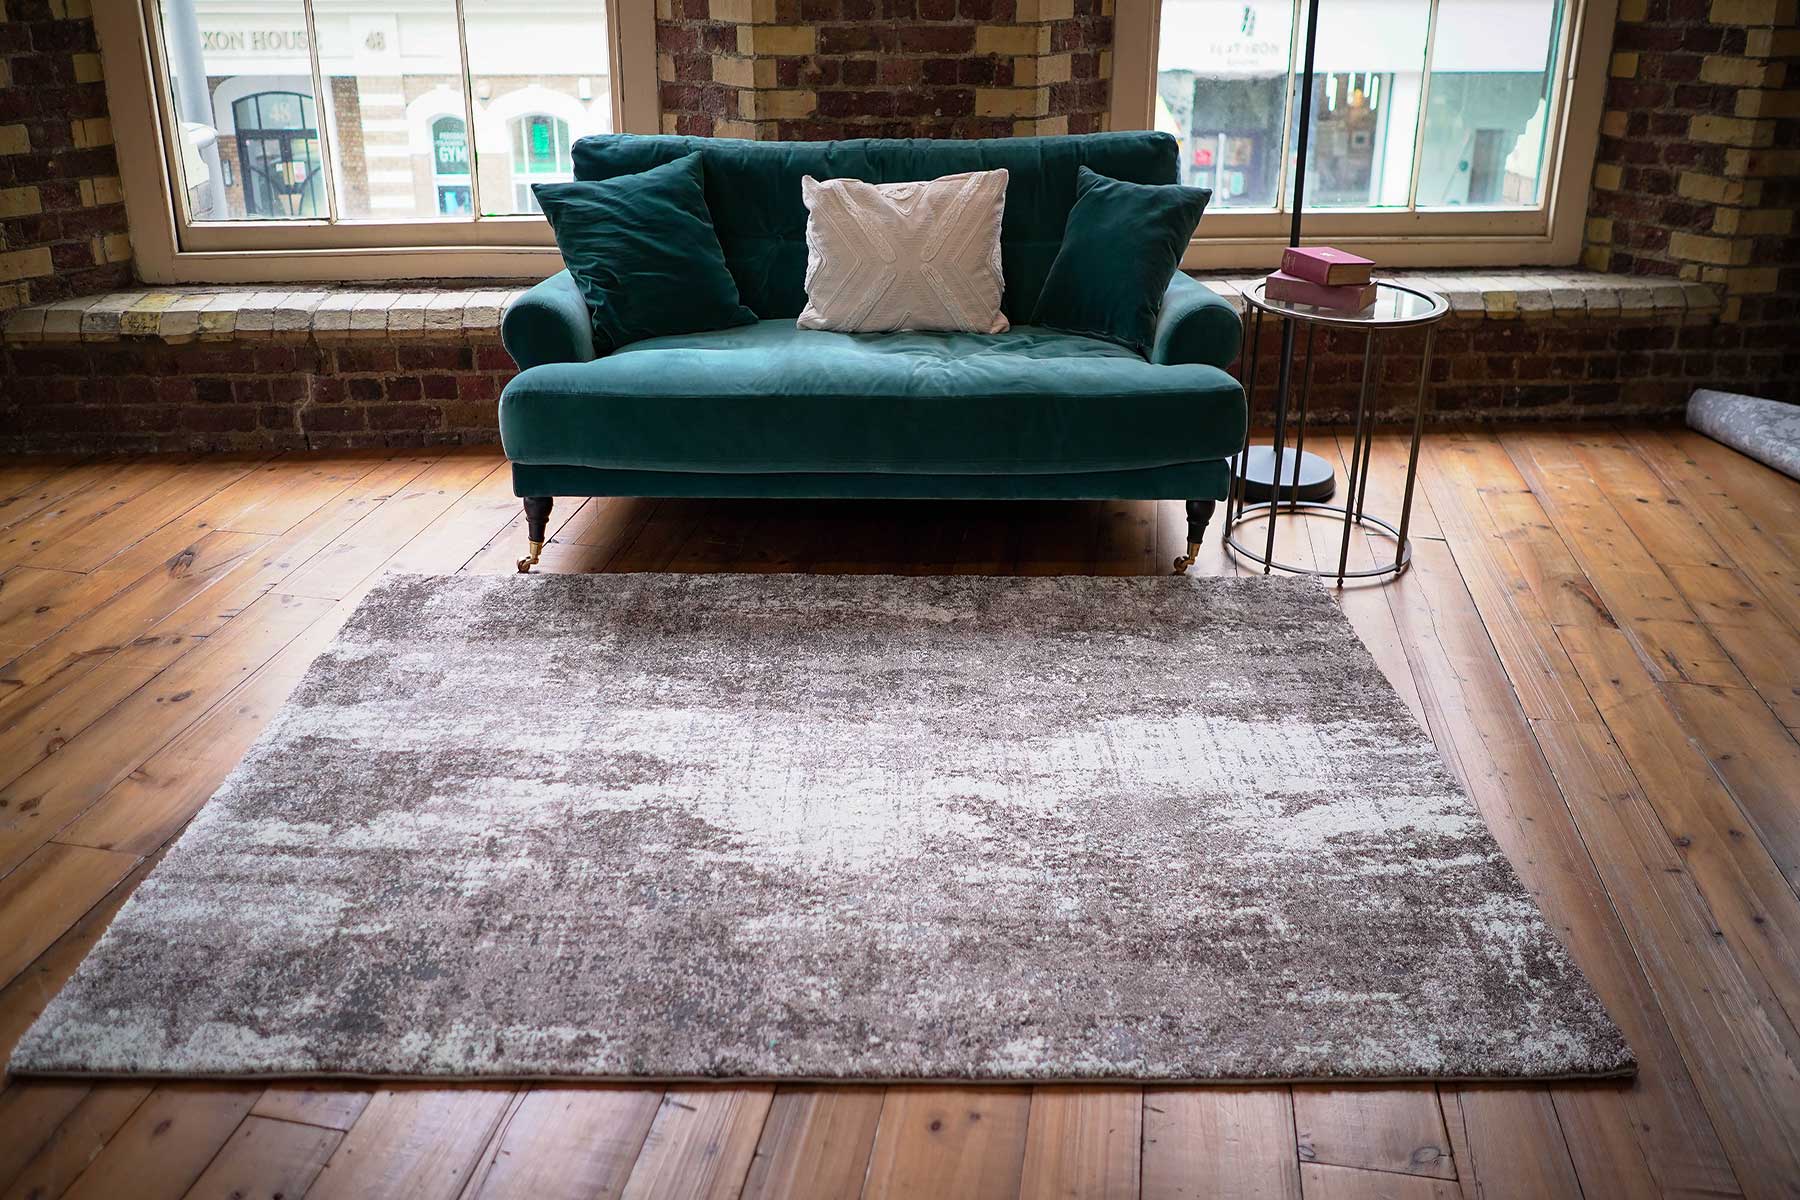 Choosing the Perfect Wool Rug for a Minimalist Space www.homelooks.com